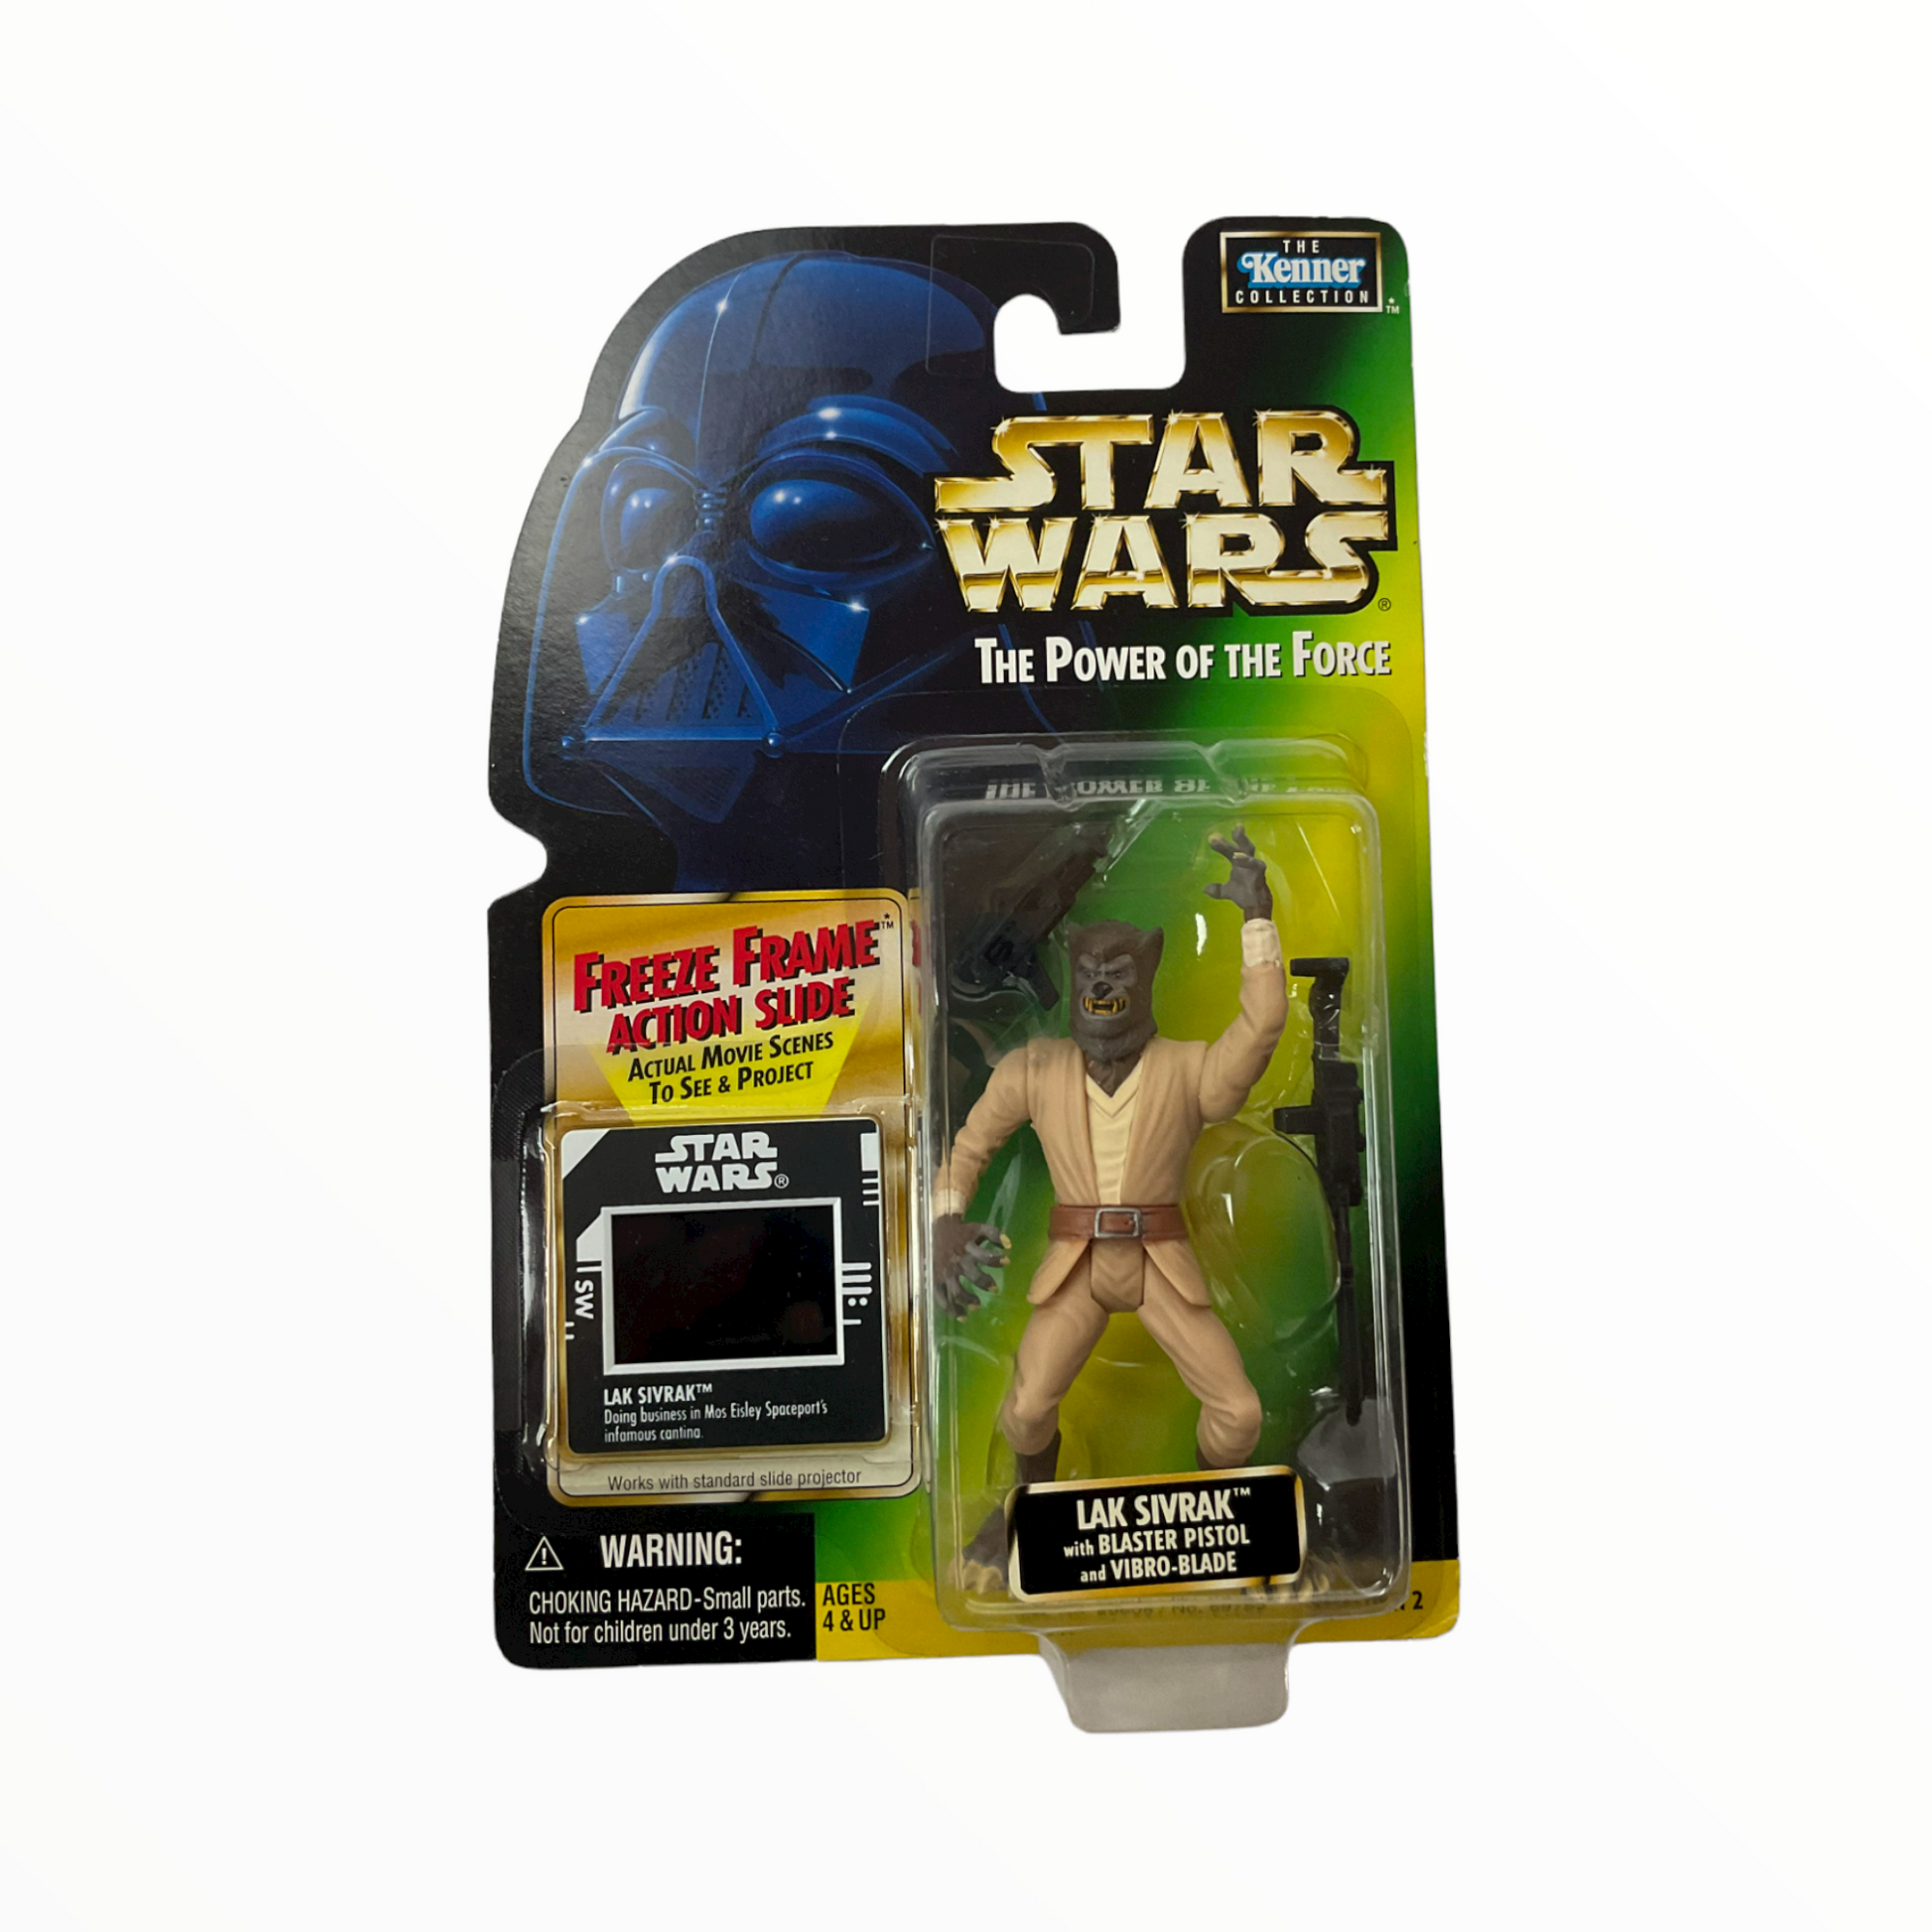 Star Wars, The Power of the Force Freeze Frame, Lak Sivrak Action Figure, 3.75 Inches